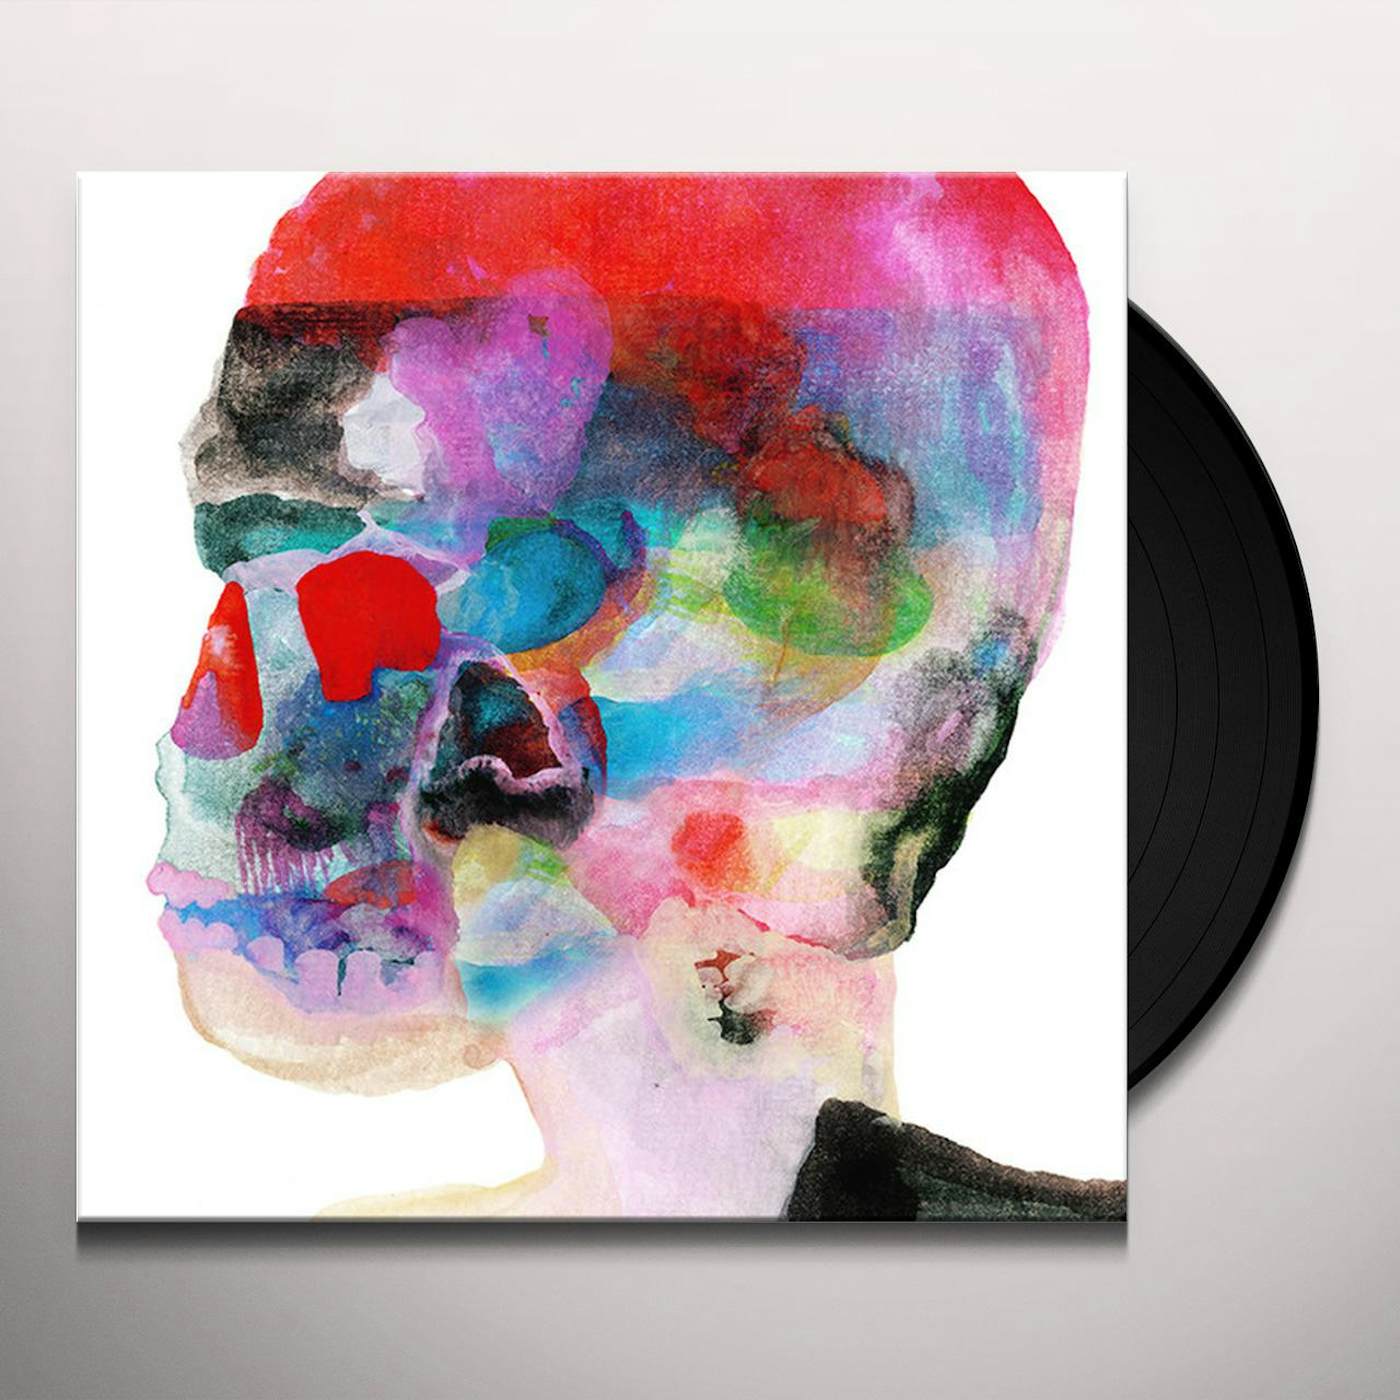 Spoon Hot Thoughts Vinyl Record